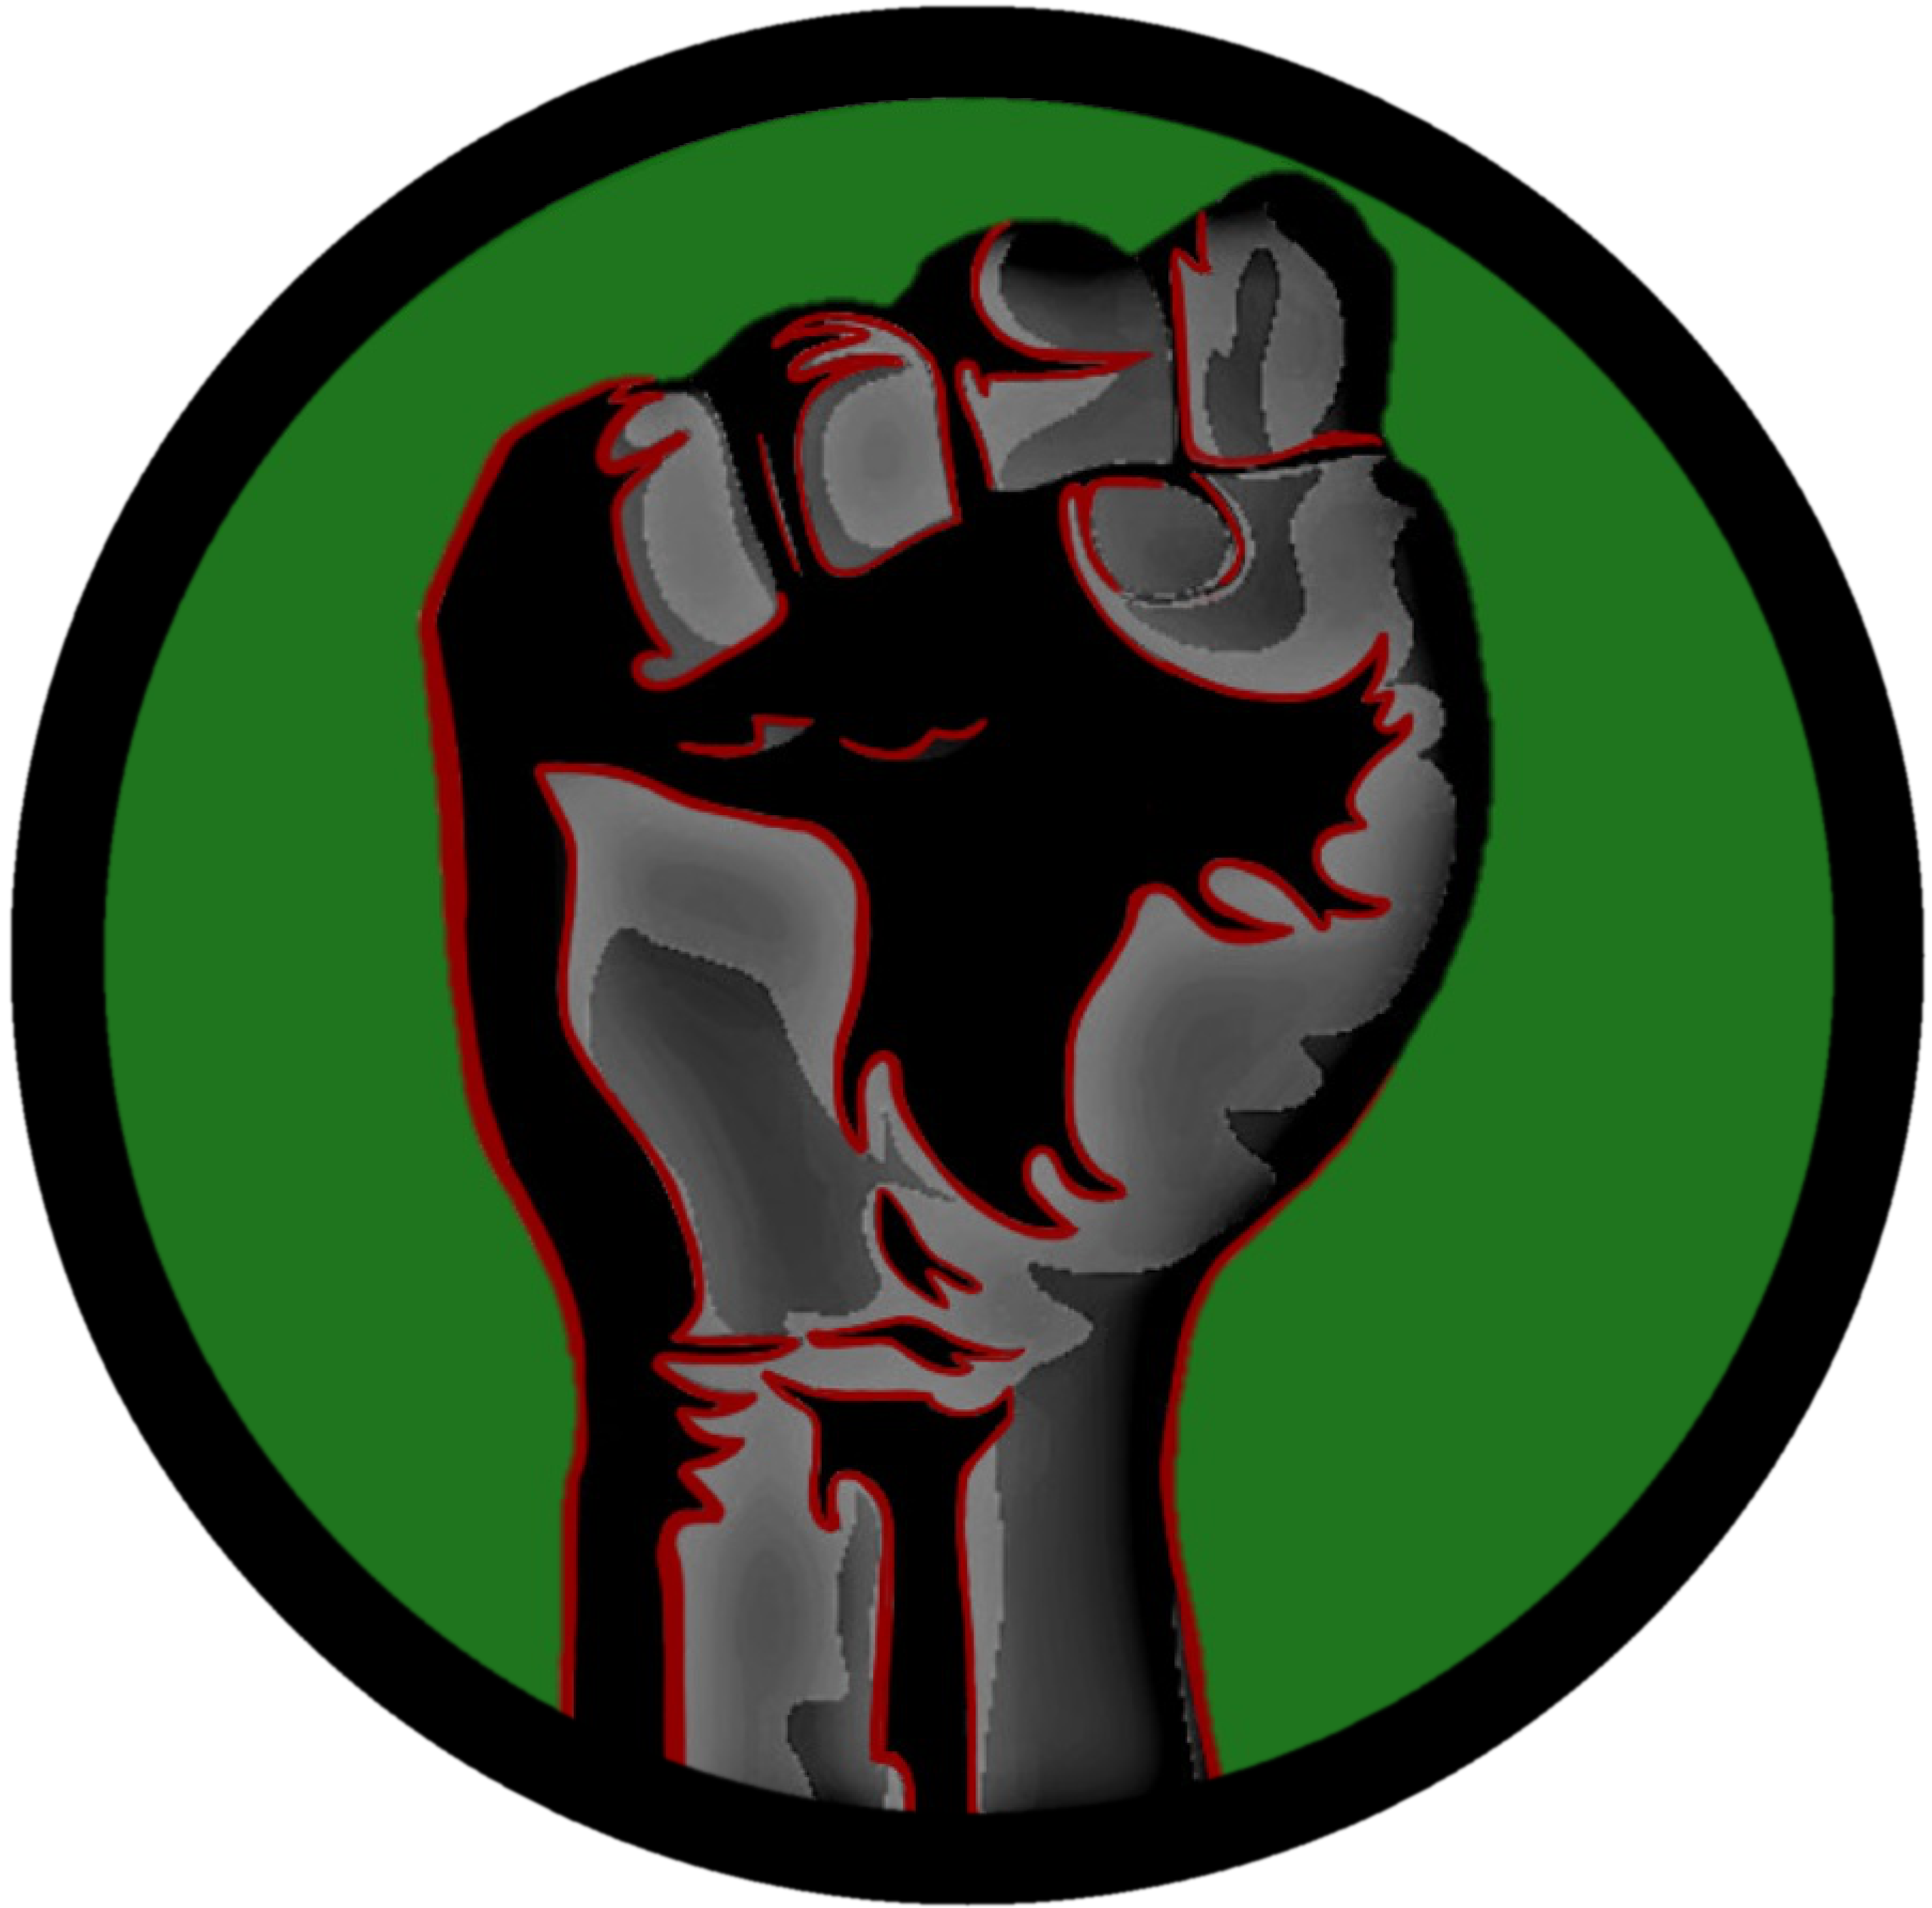 solidarity fist that is black and grey, with a red outline. Inside of a green circle with black outline